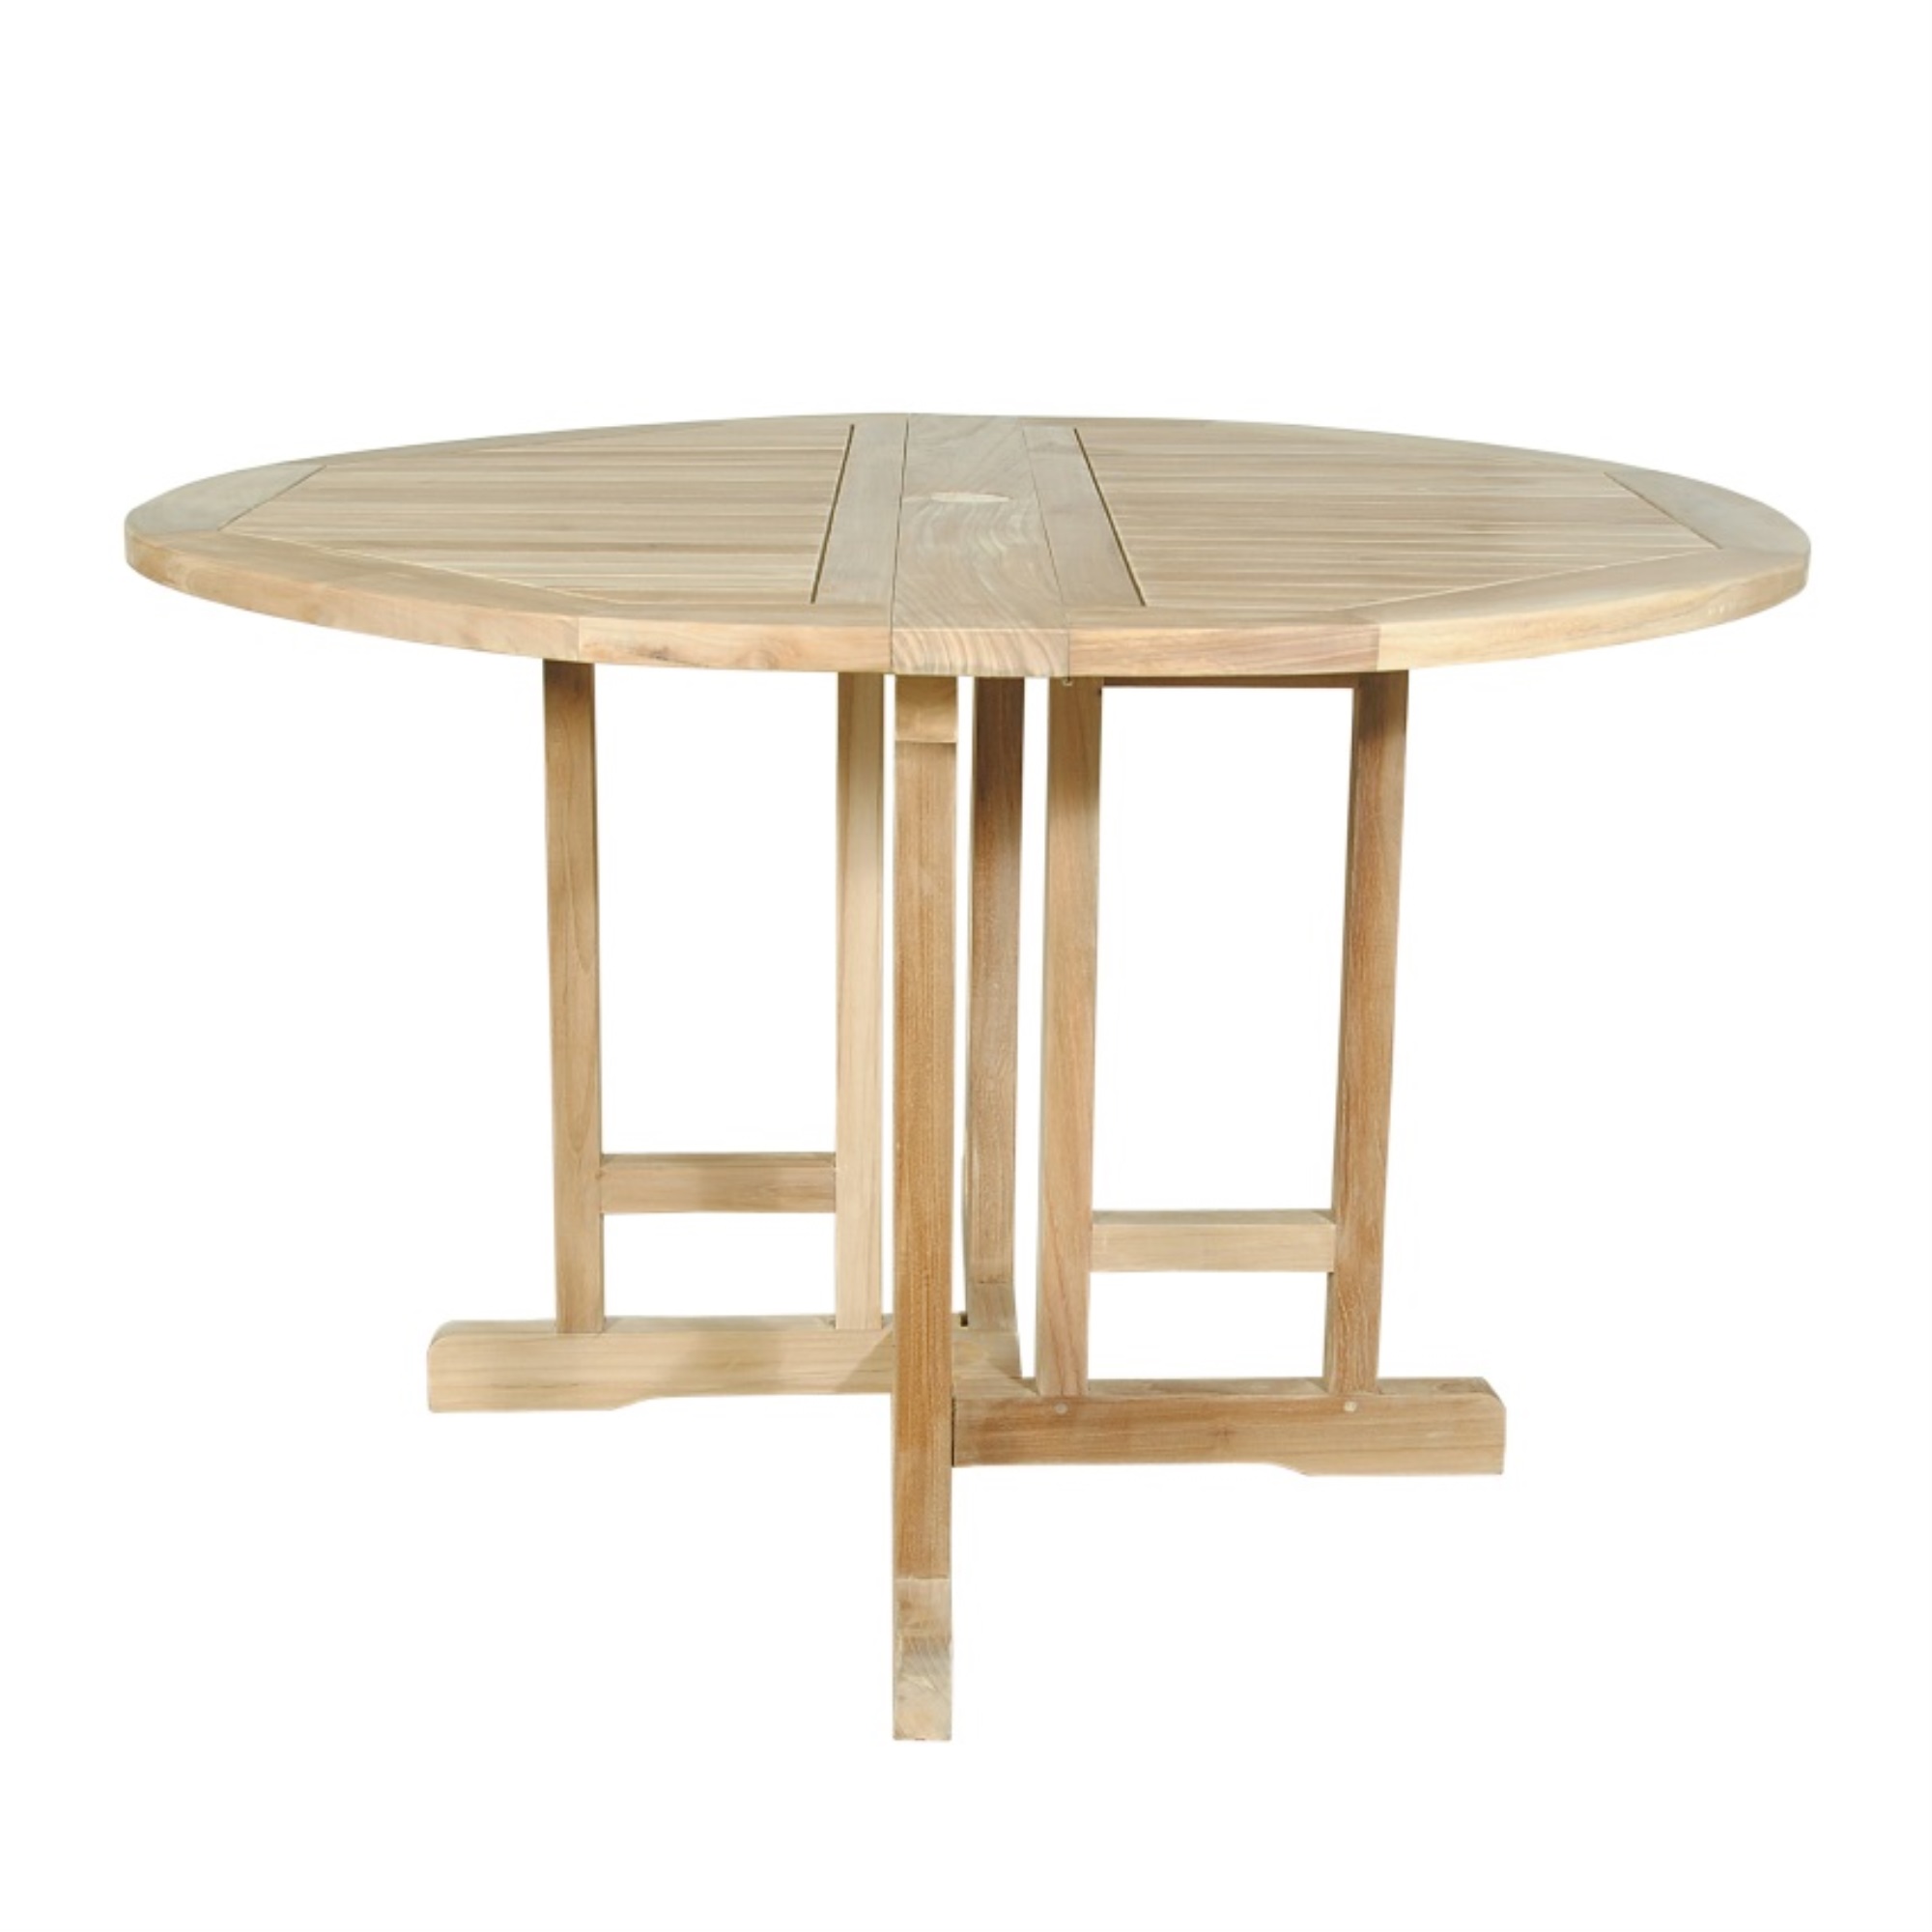 Anderson Teak Butterfly 47" Round Folding Table - image 2 of 4